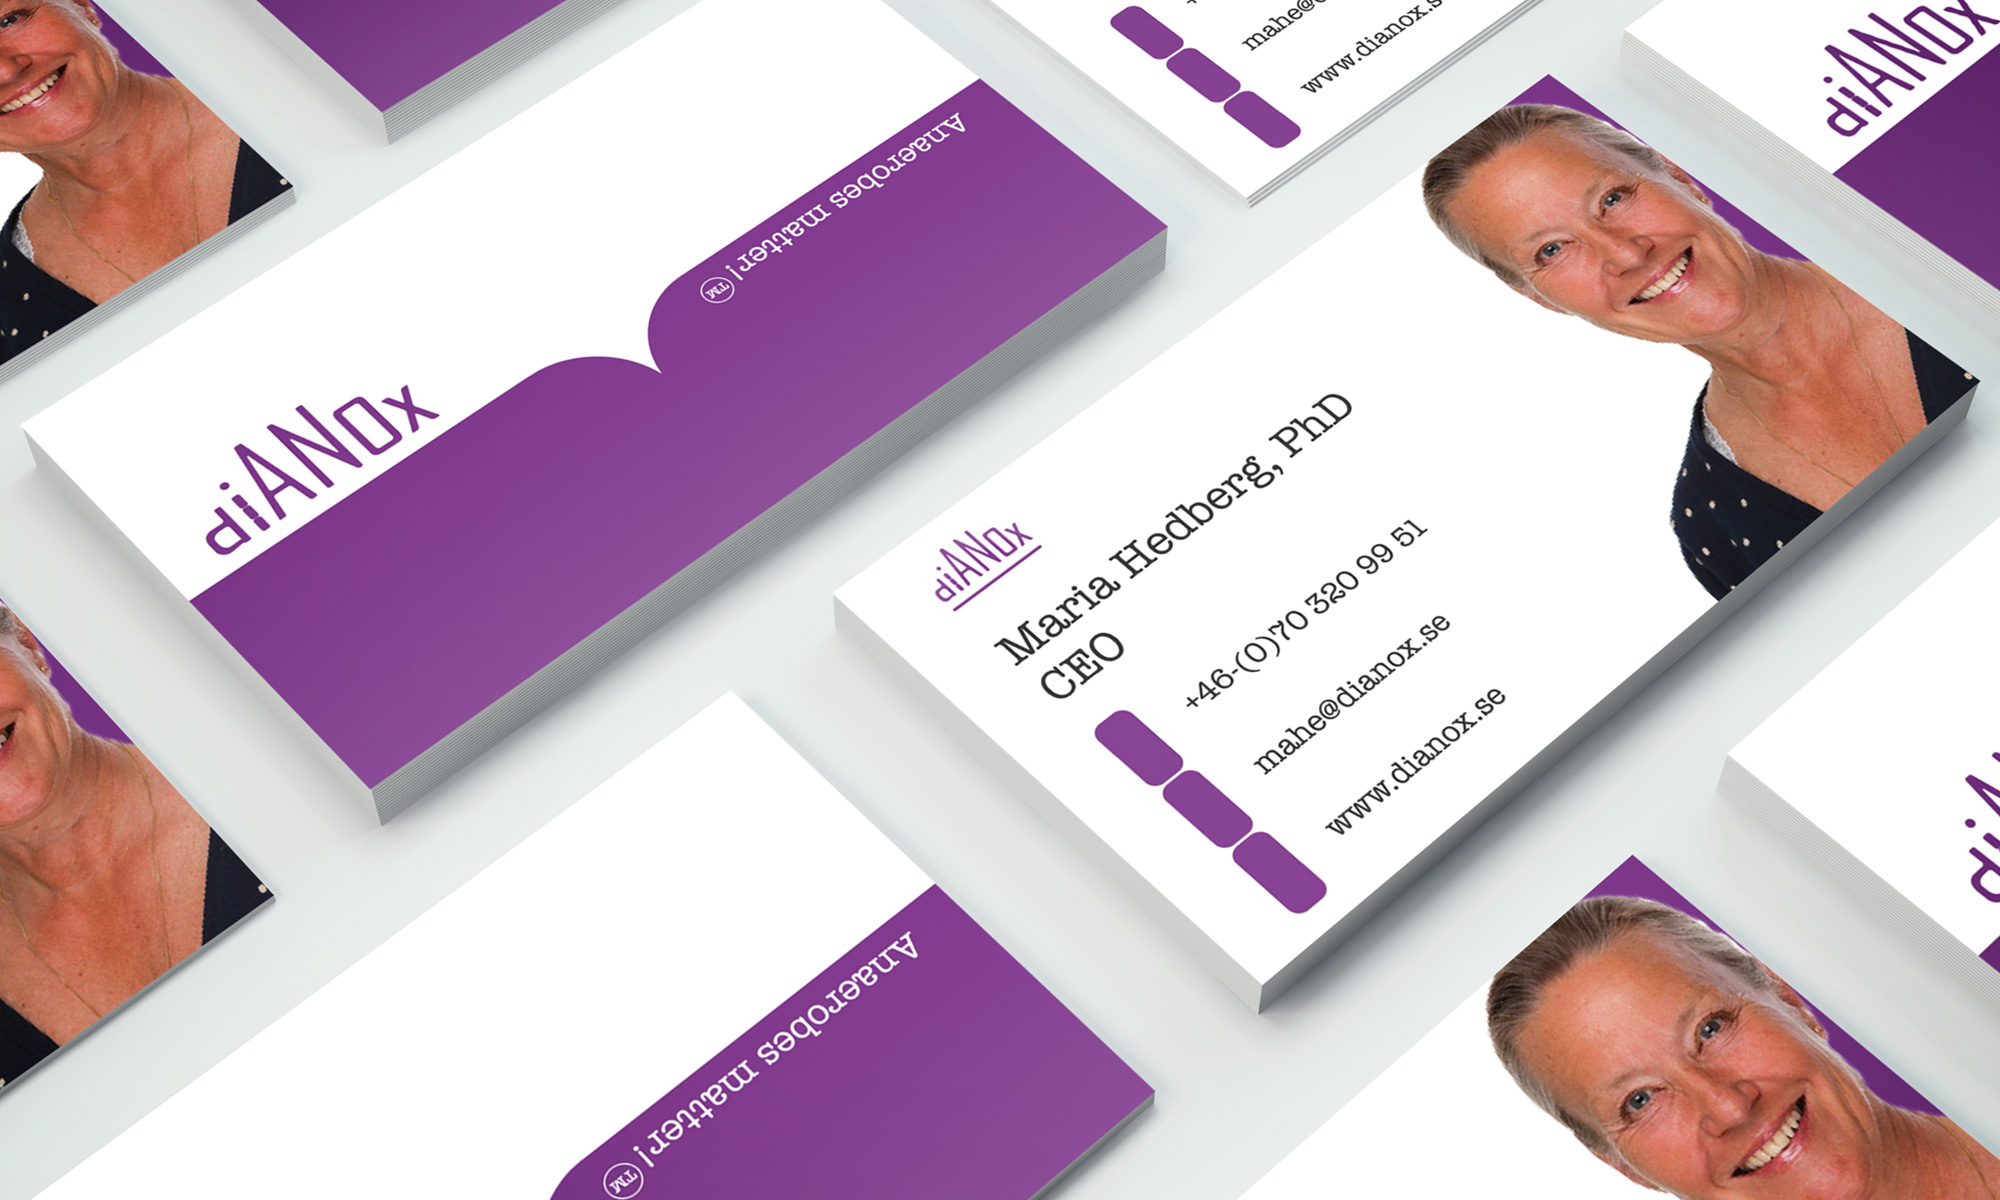 Dianox business cards layout design by Kogit Design